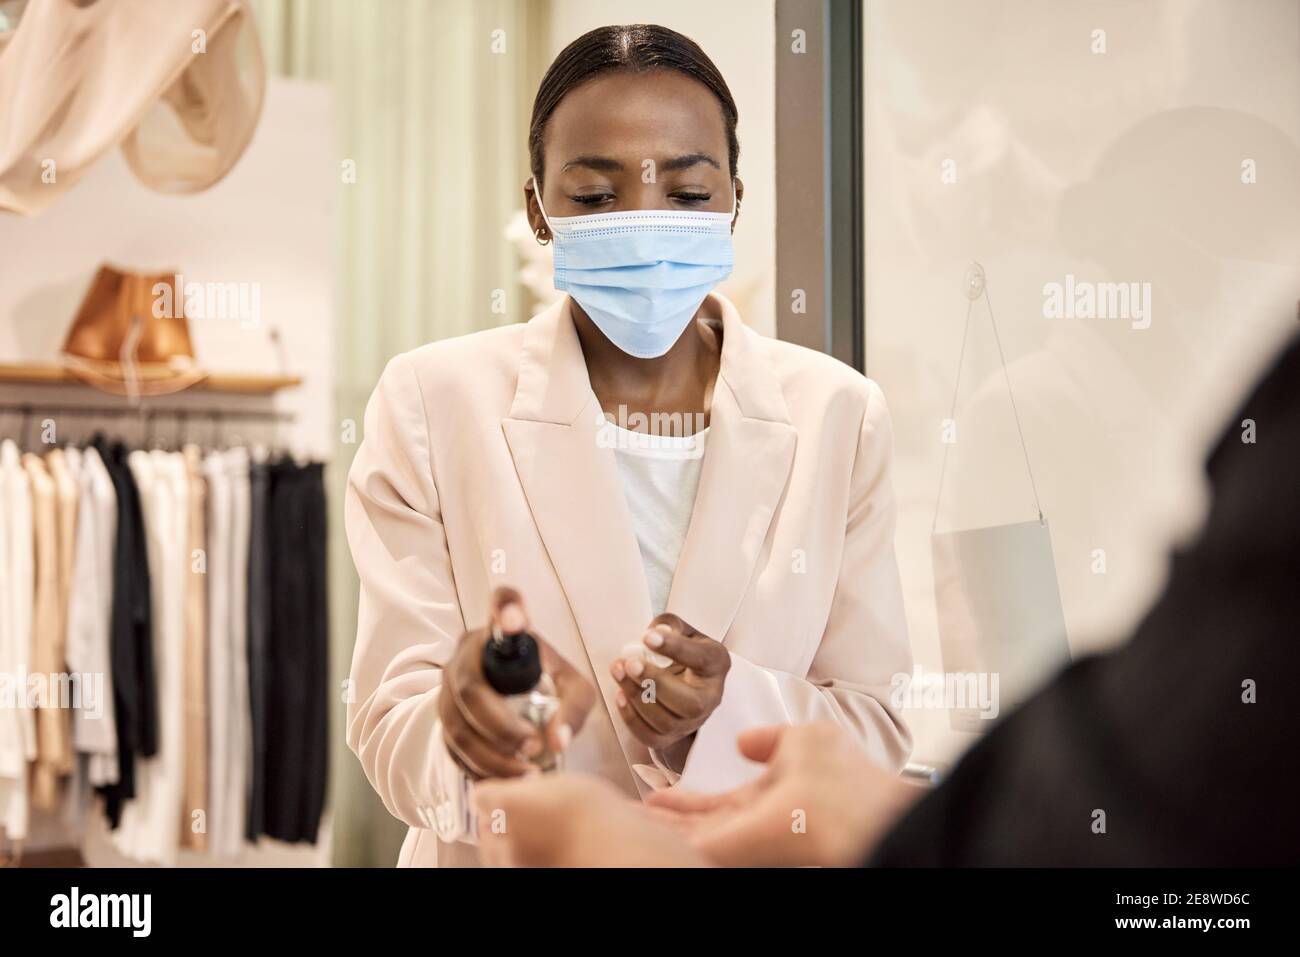 African American boutique owner applying sanitizer to a customer's hands Stock Photo